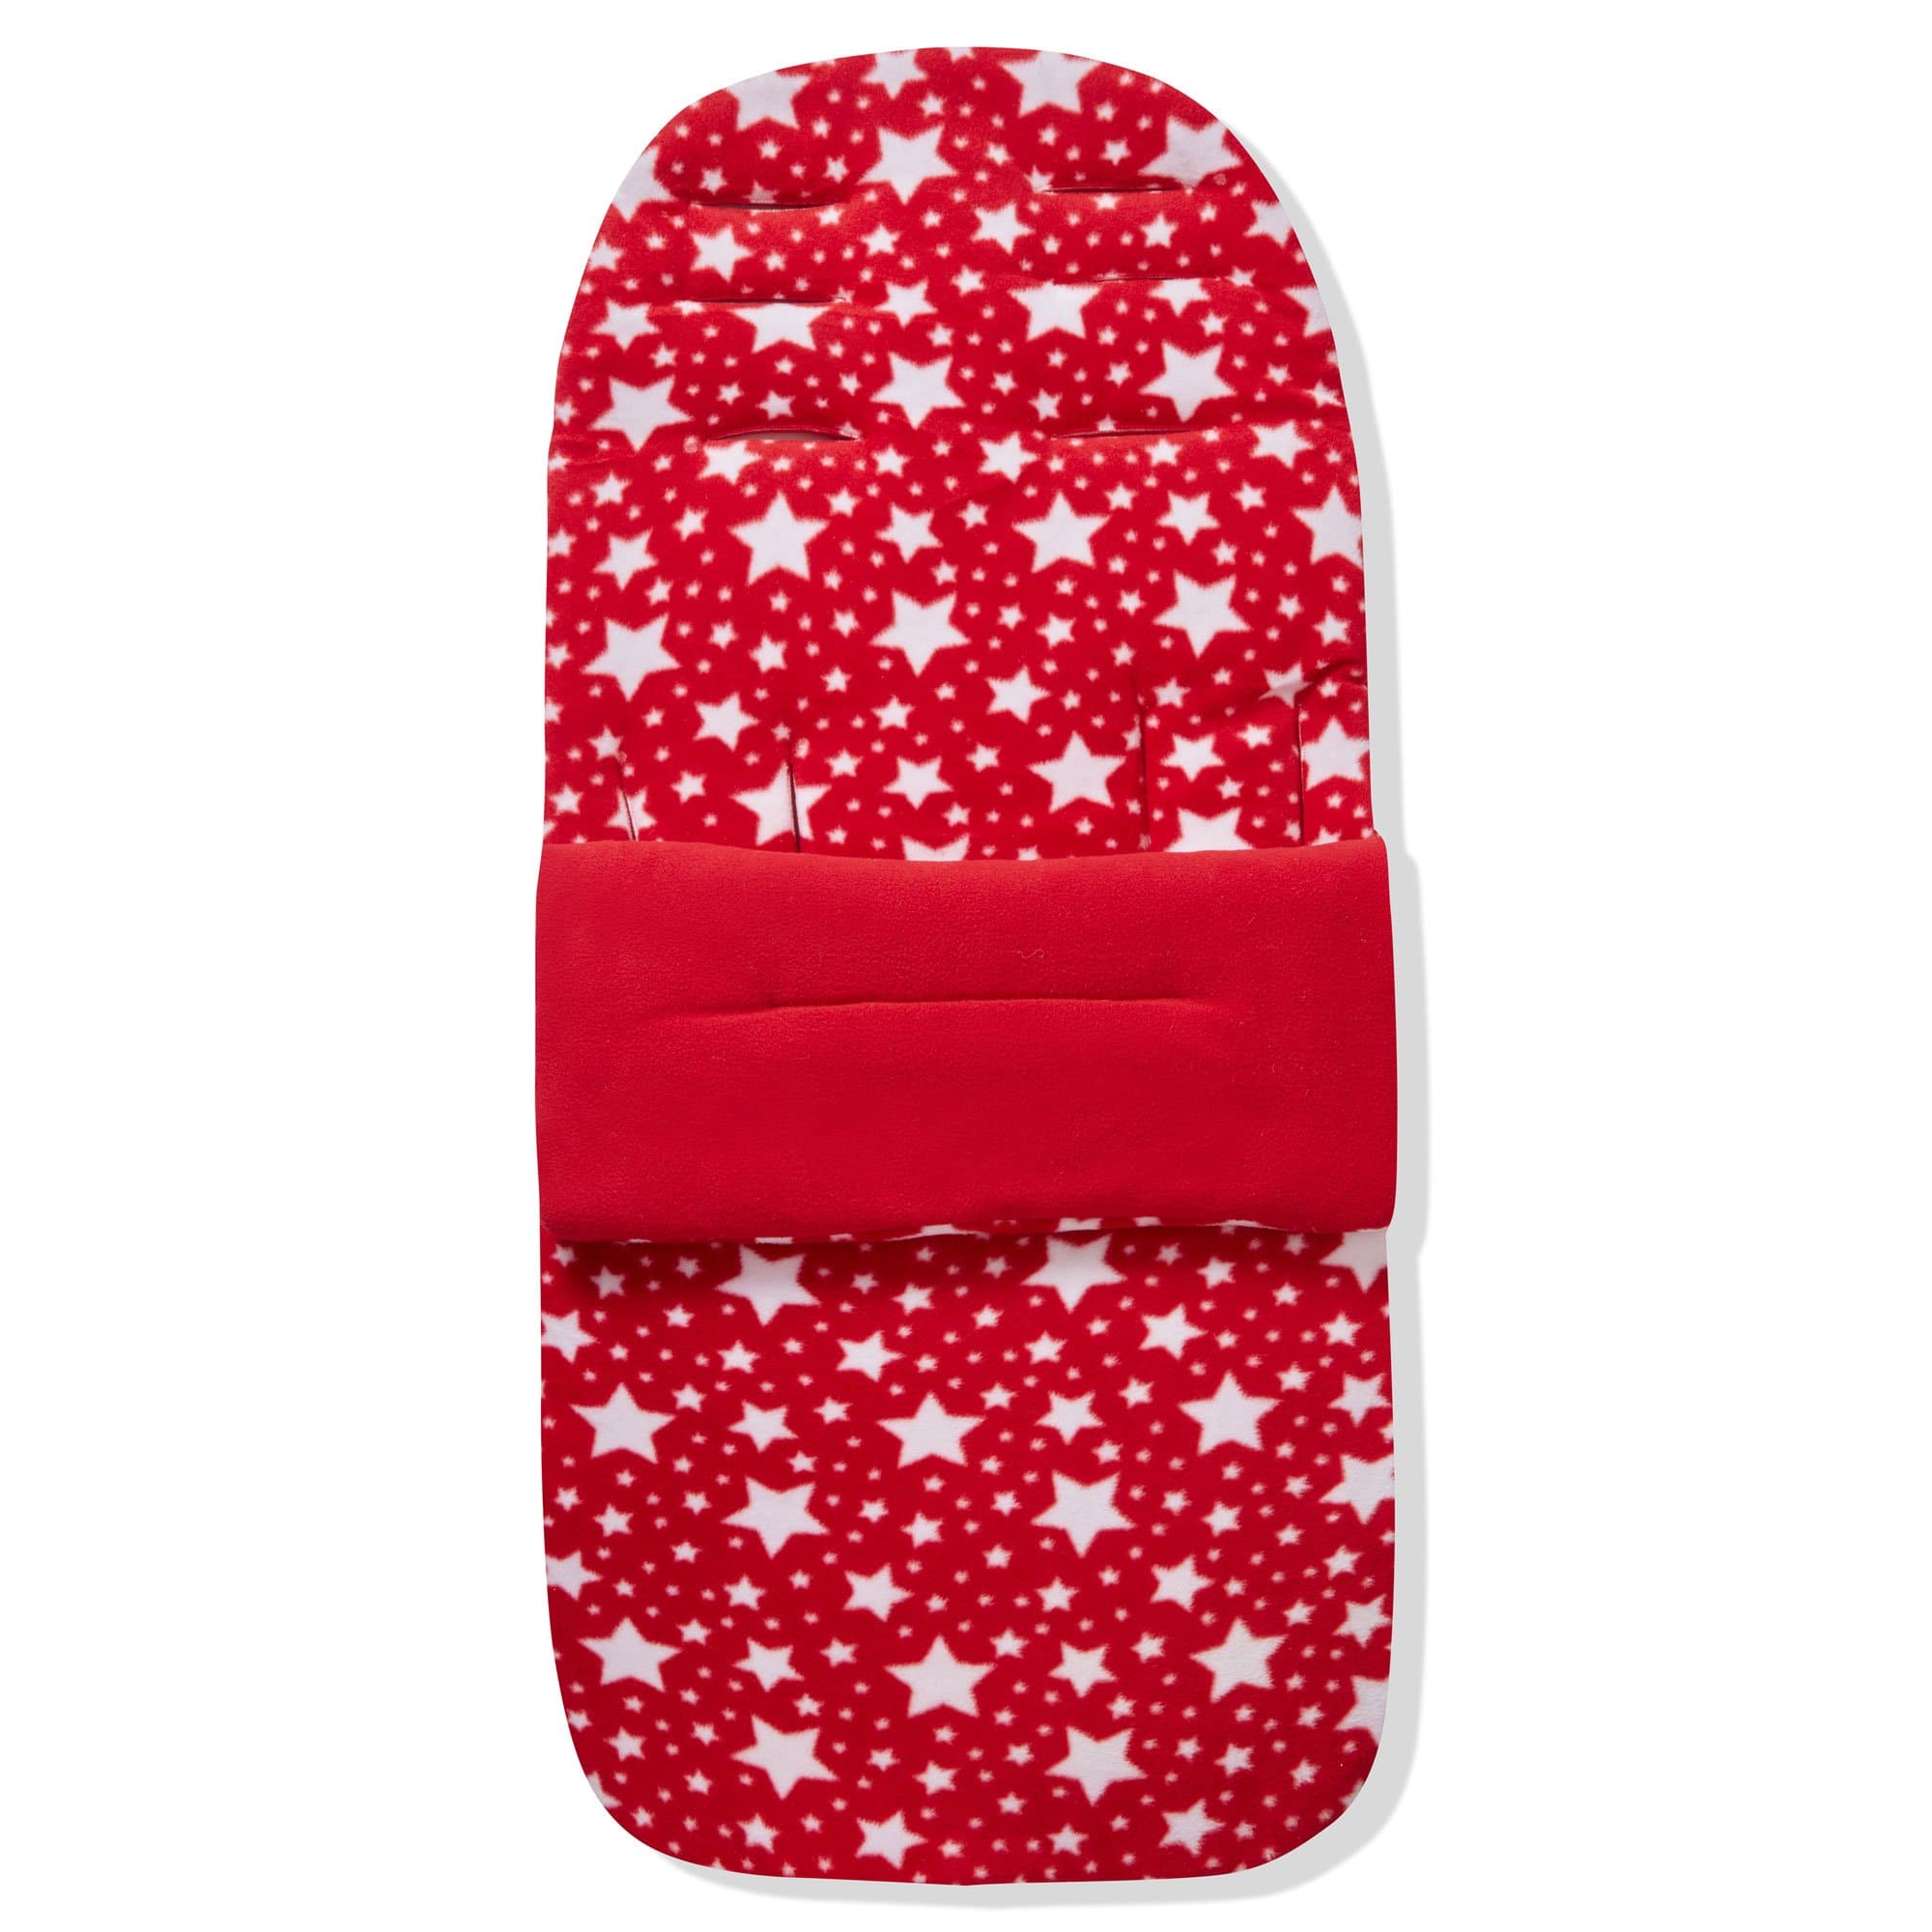 Fleece Footmuff / Cosy Toes Compatible with Pericles - Red Star / Fits All Models | For Your Little One